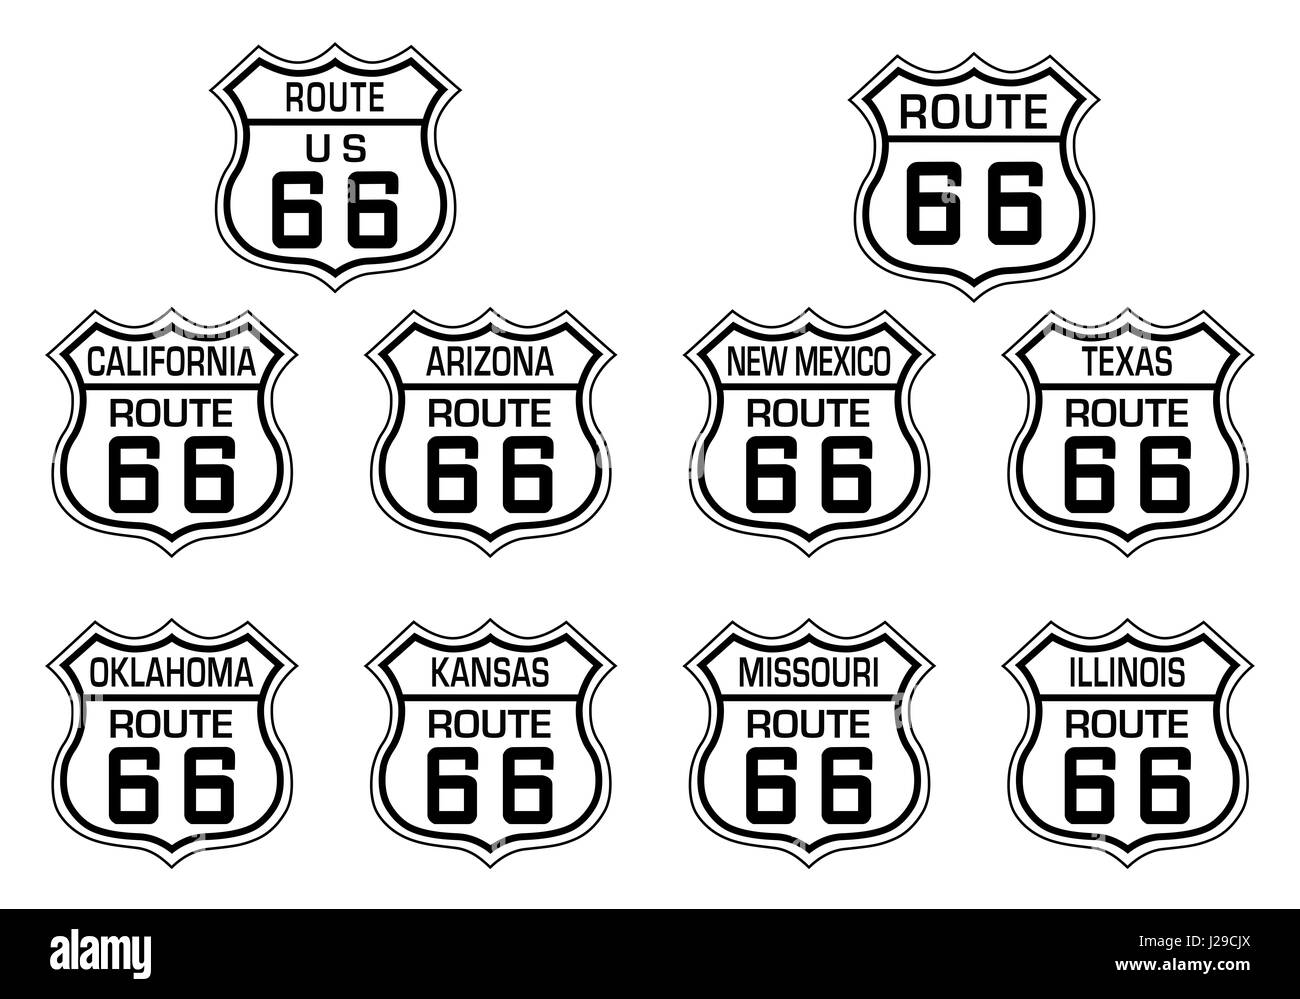 A group of Route 66 graphic shield logos with each state name. Stock Photo